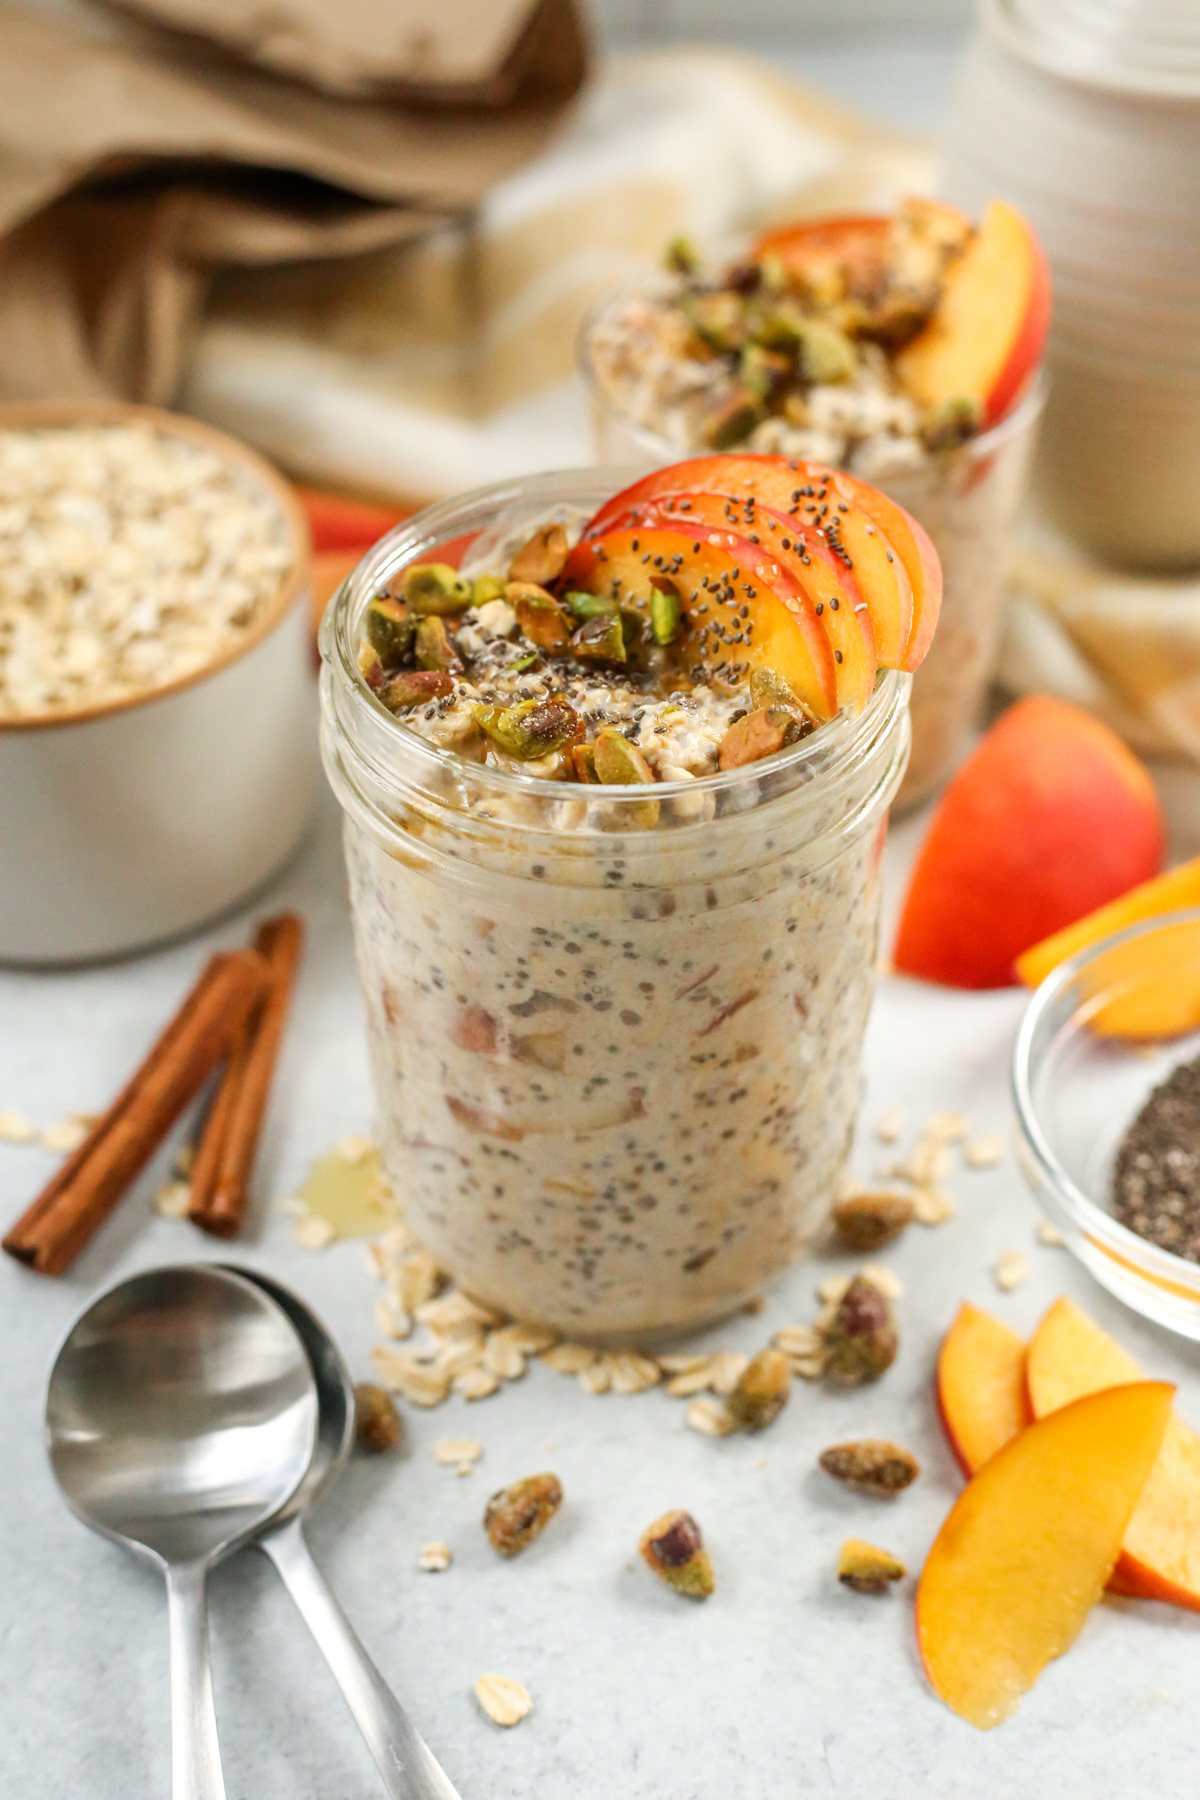 A styled shot of a serving of peaches and cream overnight oats served in a mason jar in a kitchen scene, with serving spoons, cinnamon sticks, extra ingredients, and fresh peaches displayed around it